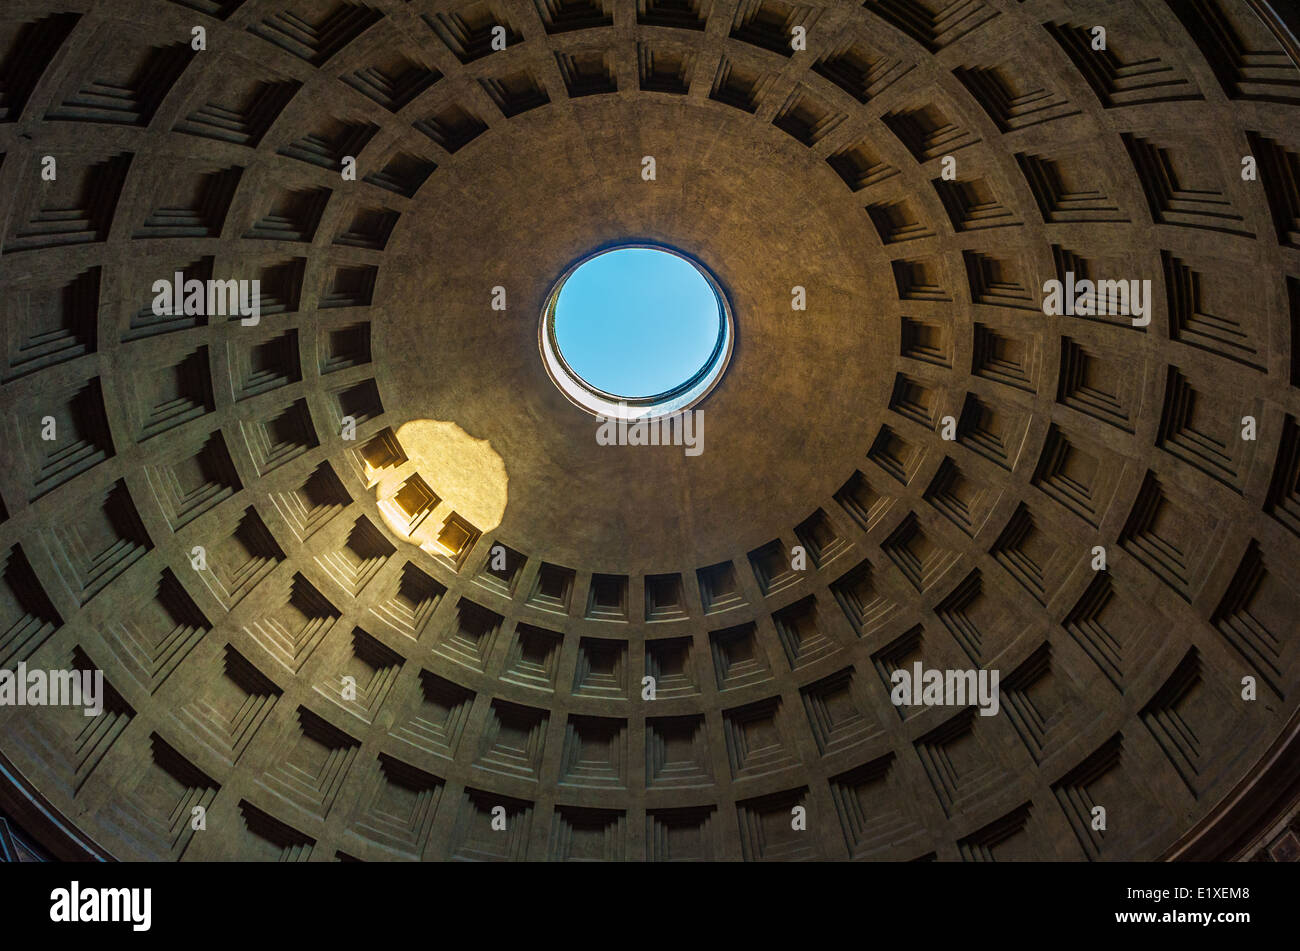 Dome of the Pantheon, Rome, Italy Stock Photo